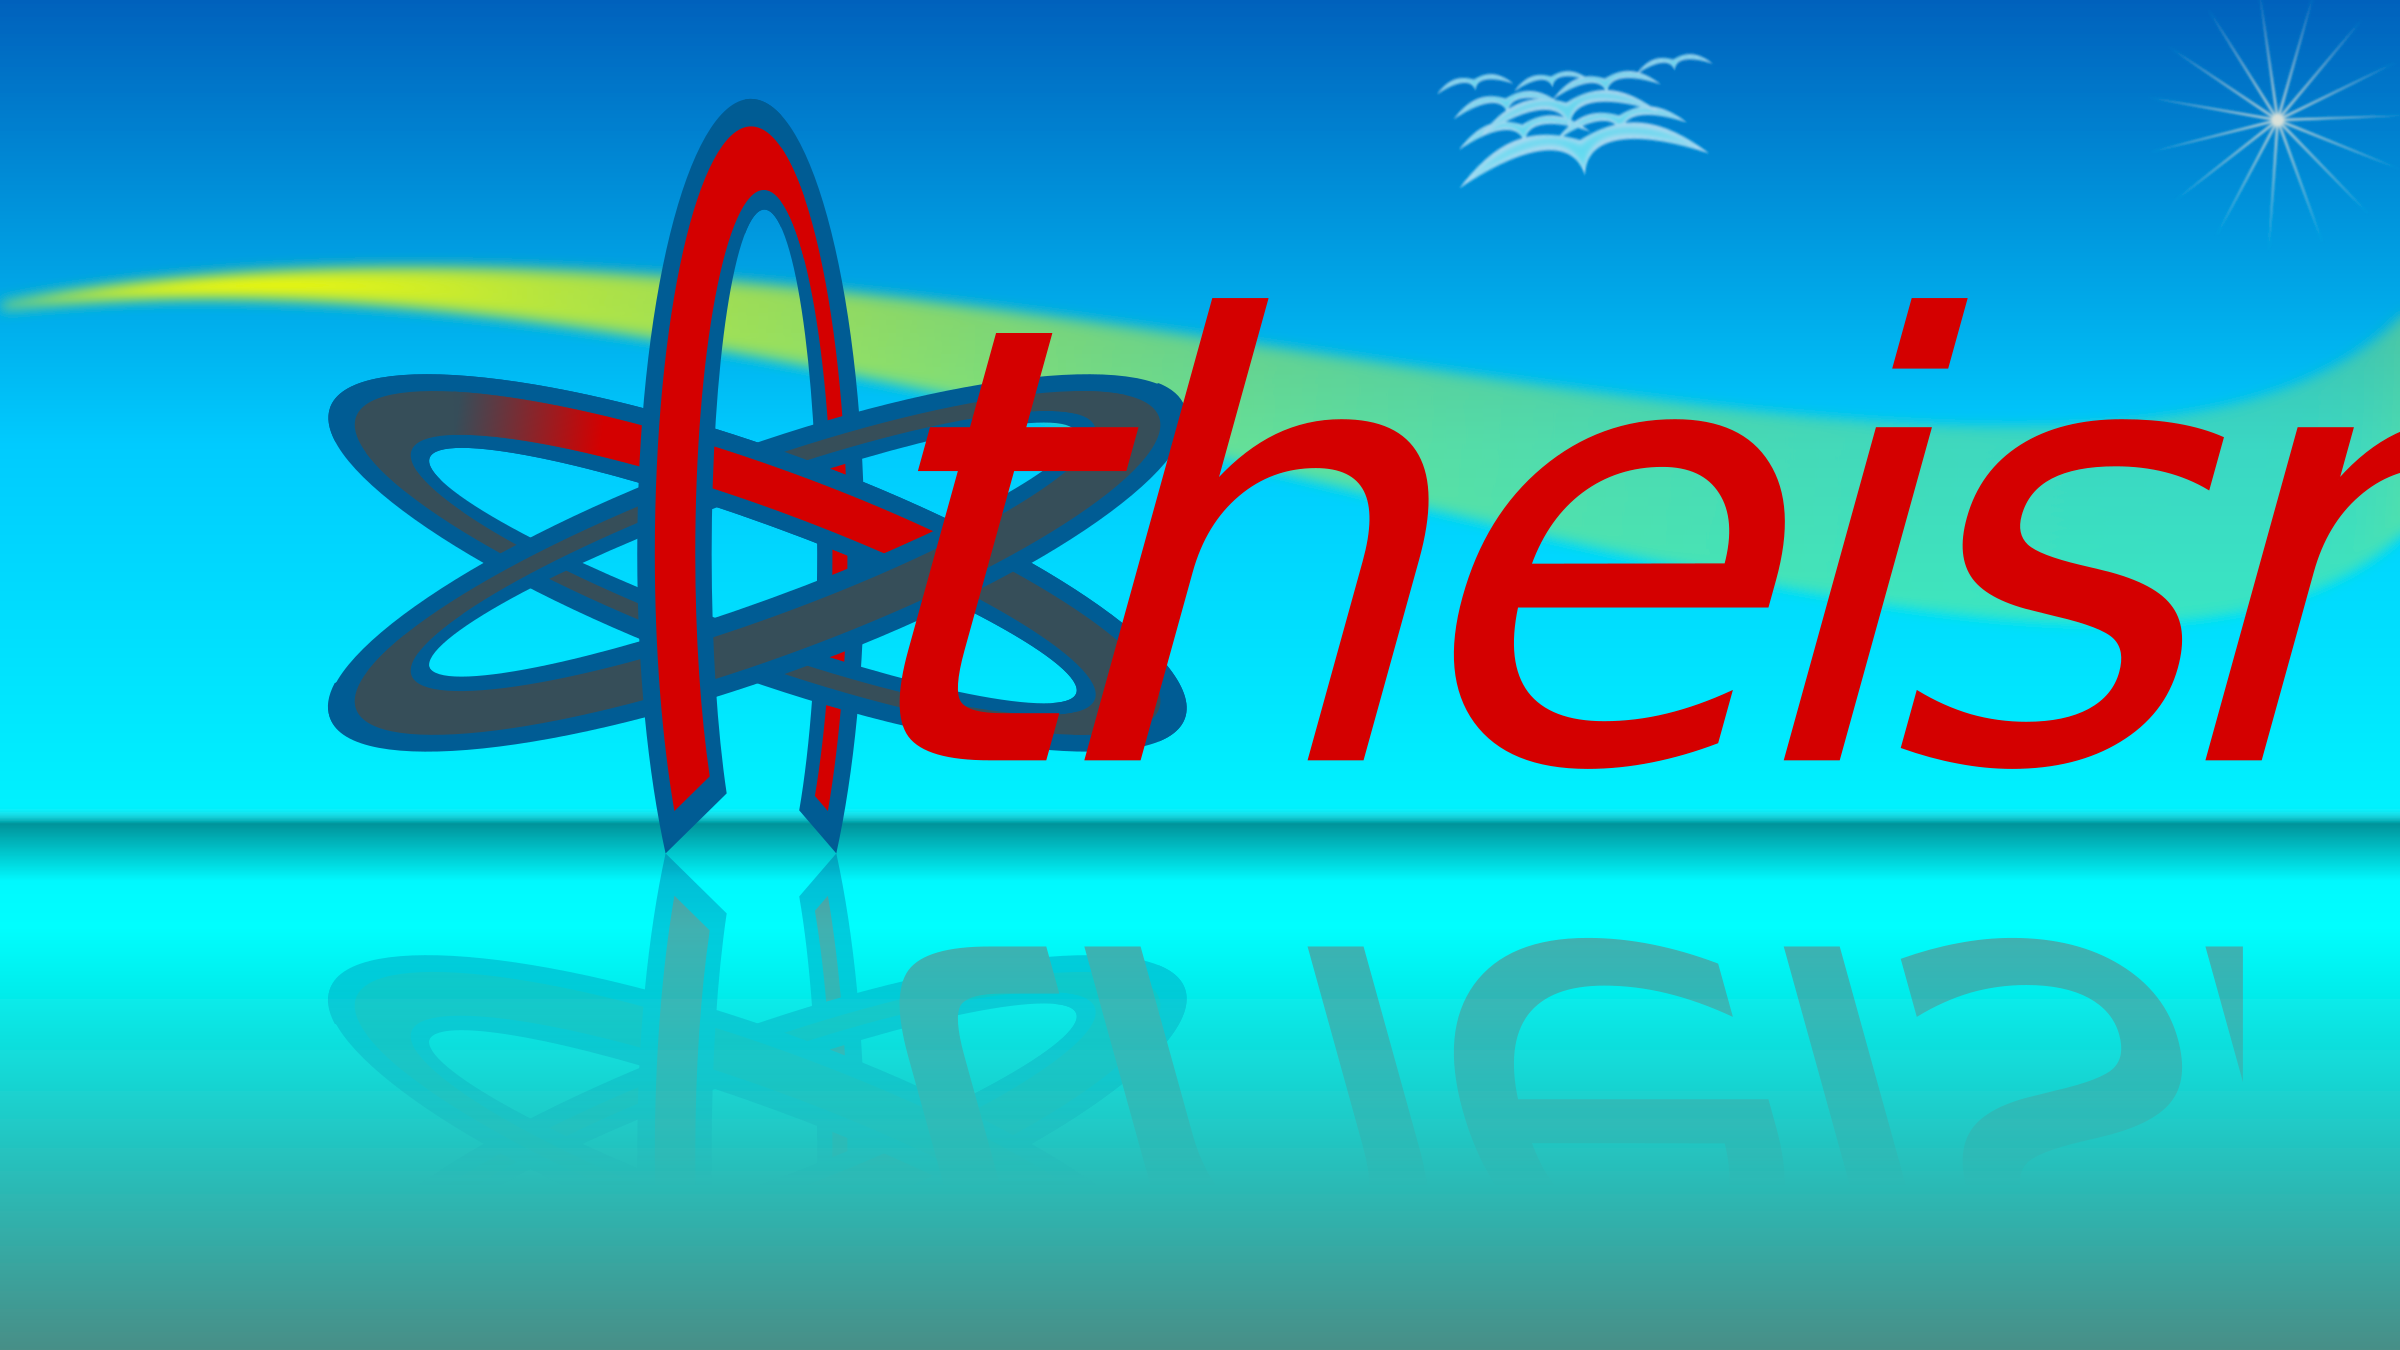 Atom Of Atheism Wallpaper 9by16 SVG Clip arts